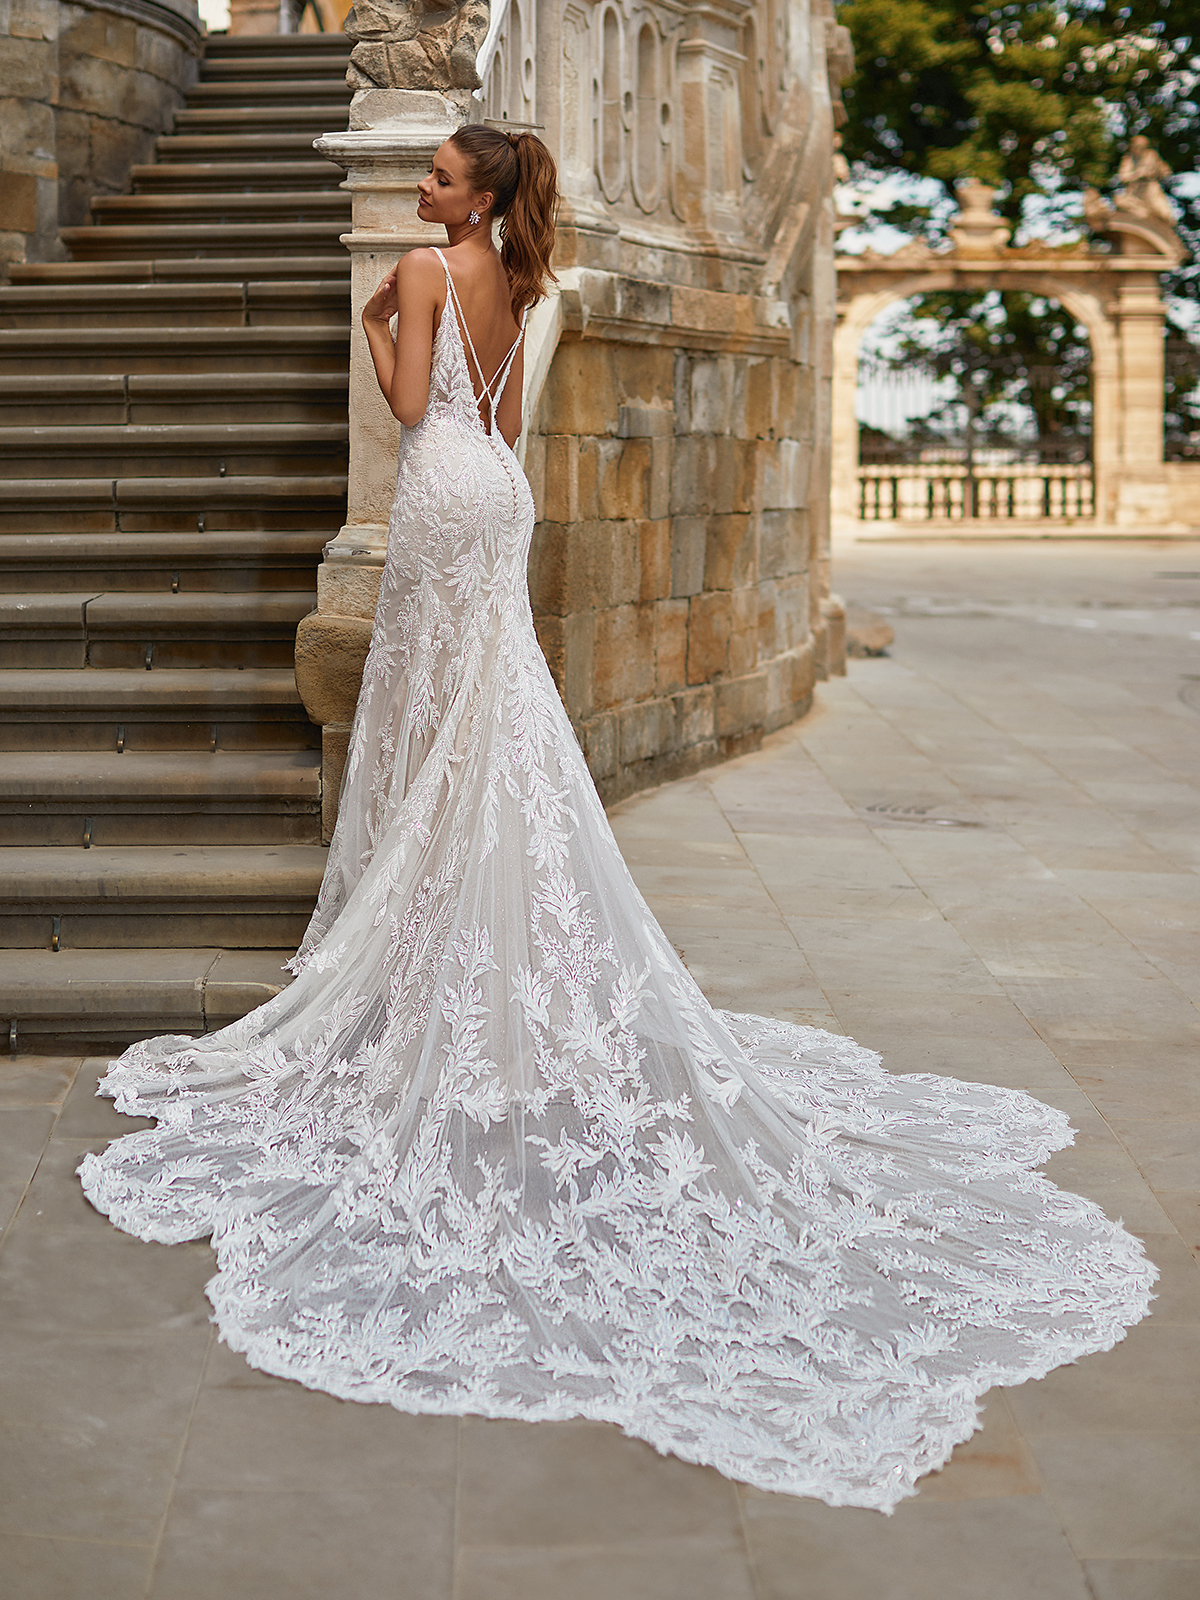 designer lace wedding dresses with sleeves